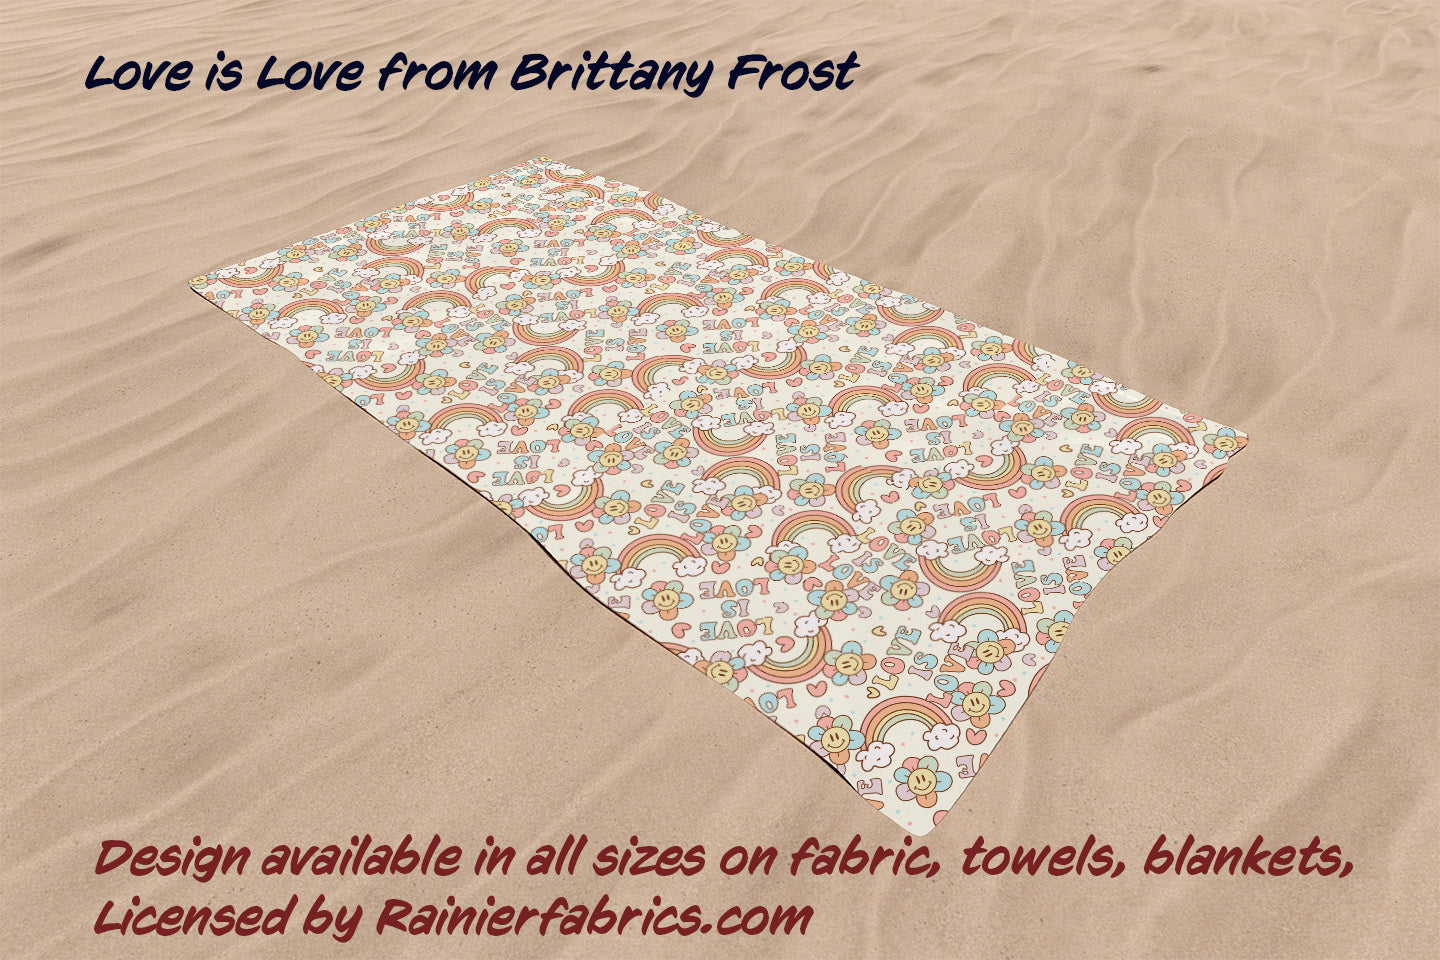 Love is Love from Brittany Frost - 2-5 day turnaround - Order by 1/2 yard; Description of bases below